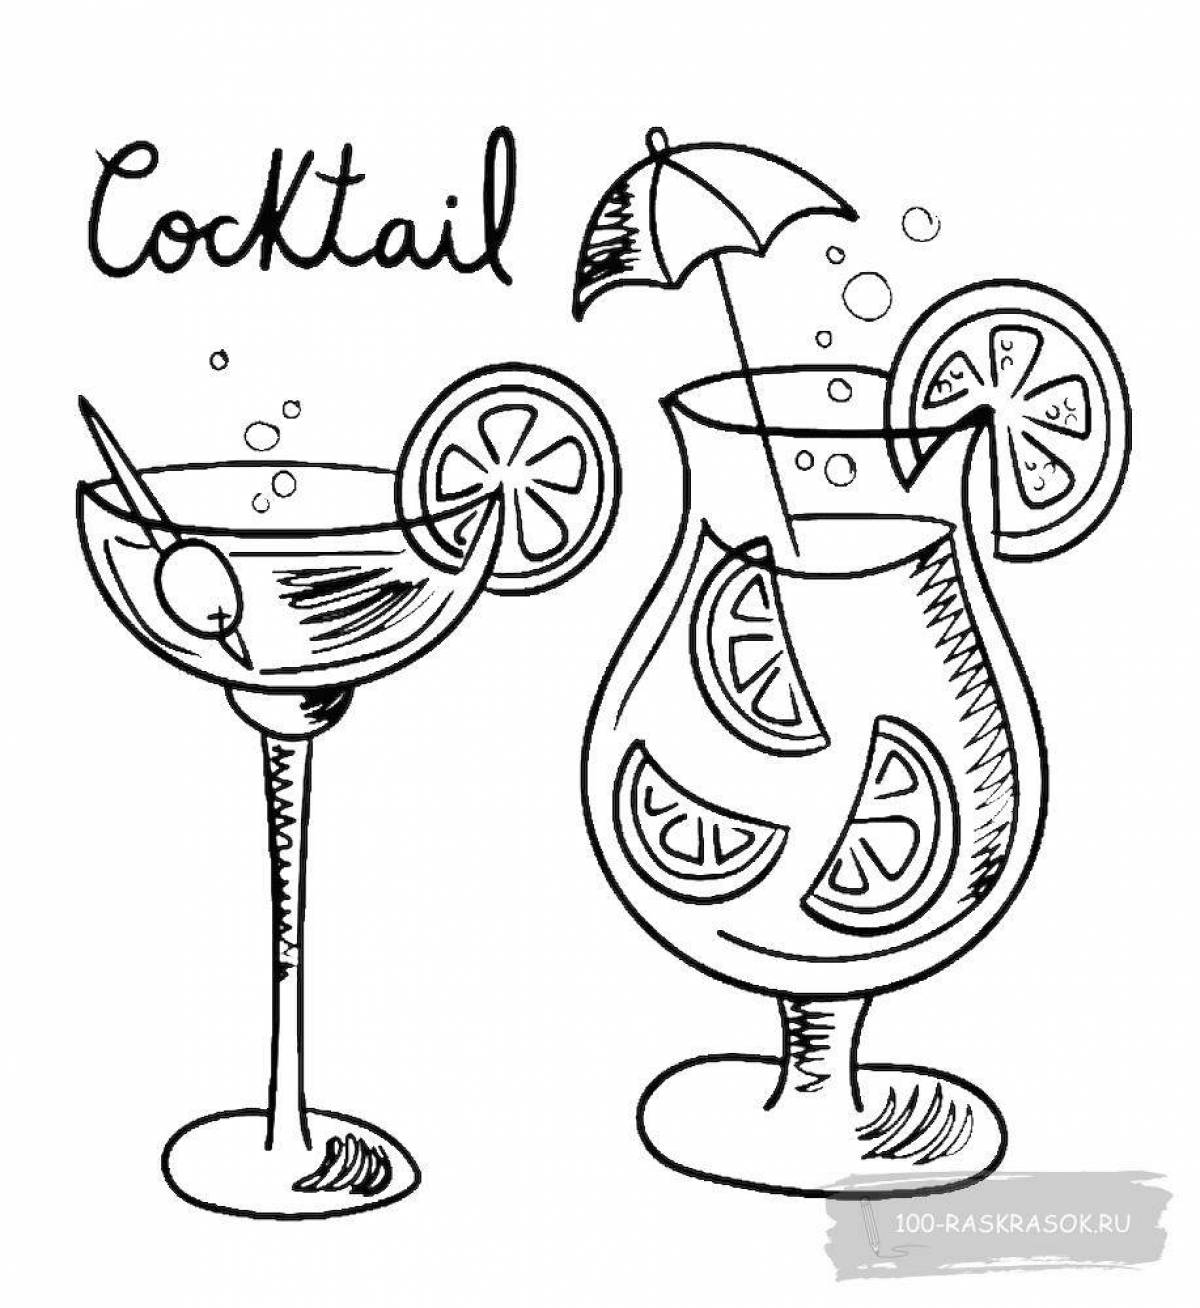 Coloring page joyful cocktail for children